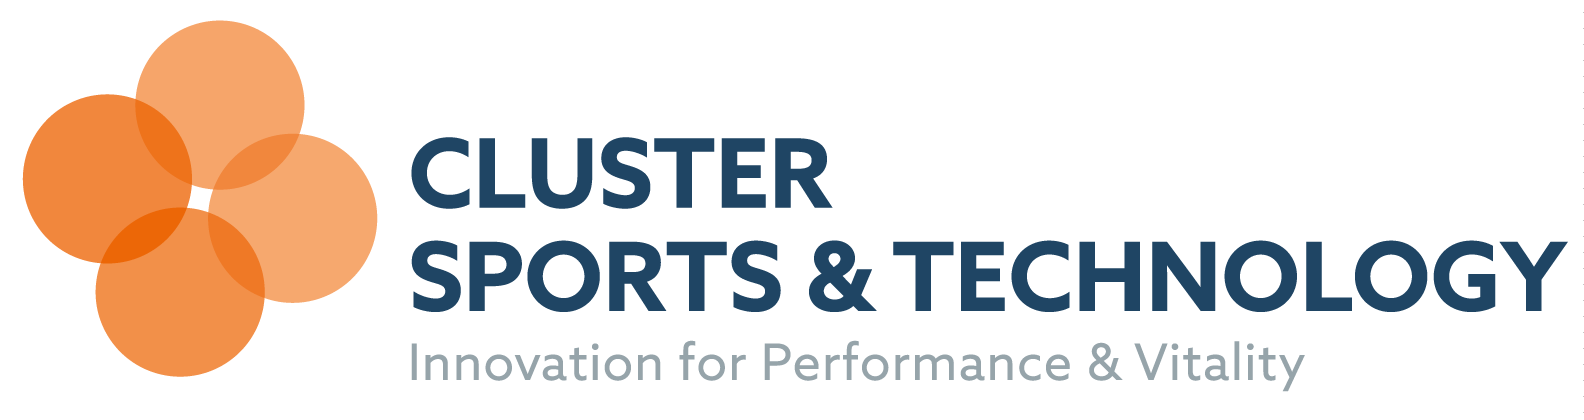 Cluster Sports & Technology